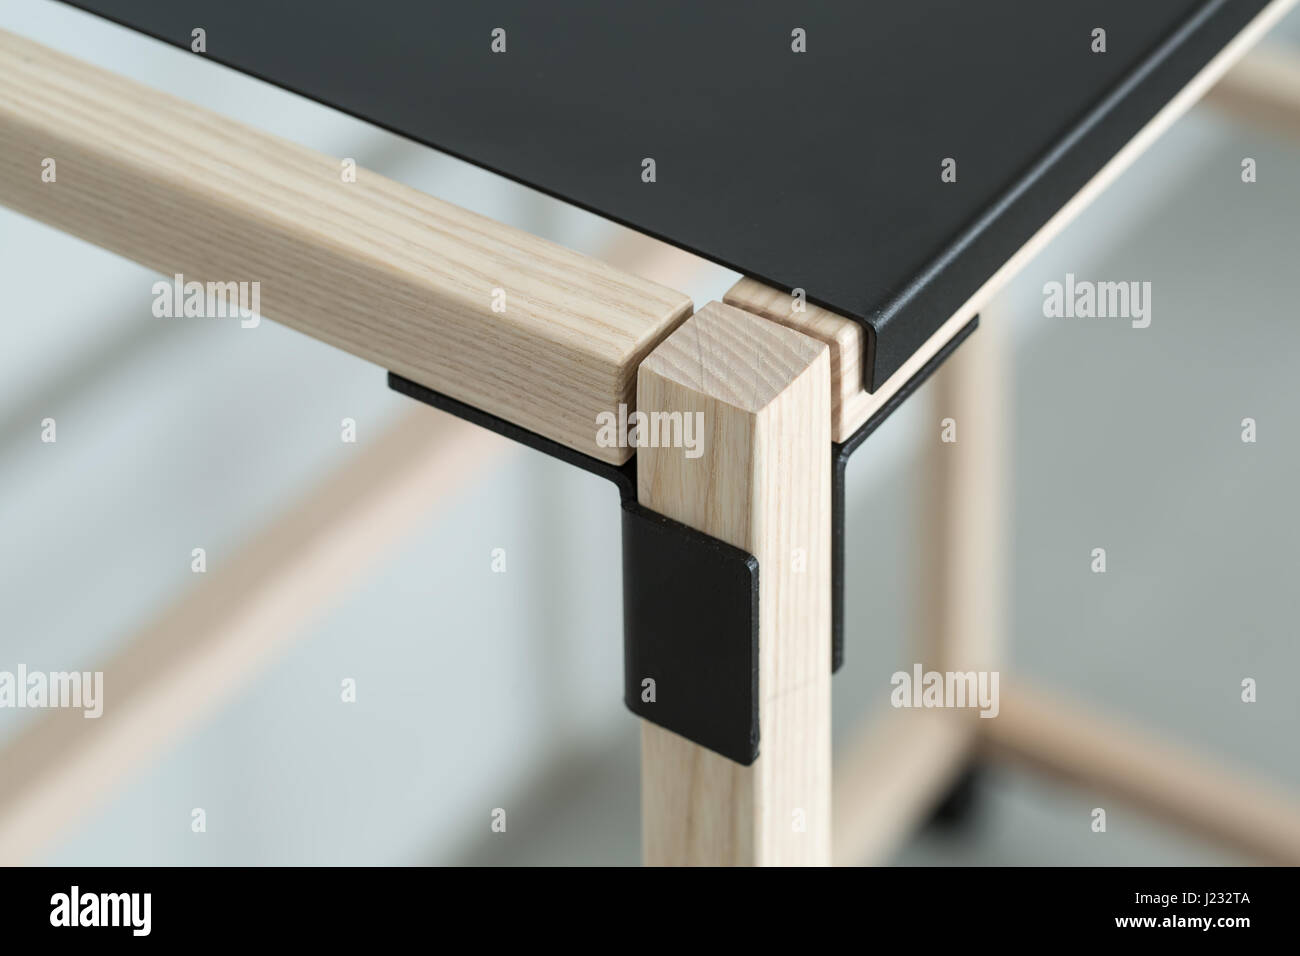 Wooden construct with metal parts Stock Photo